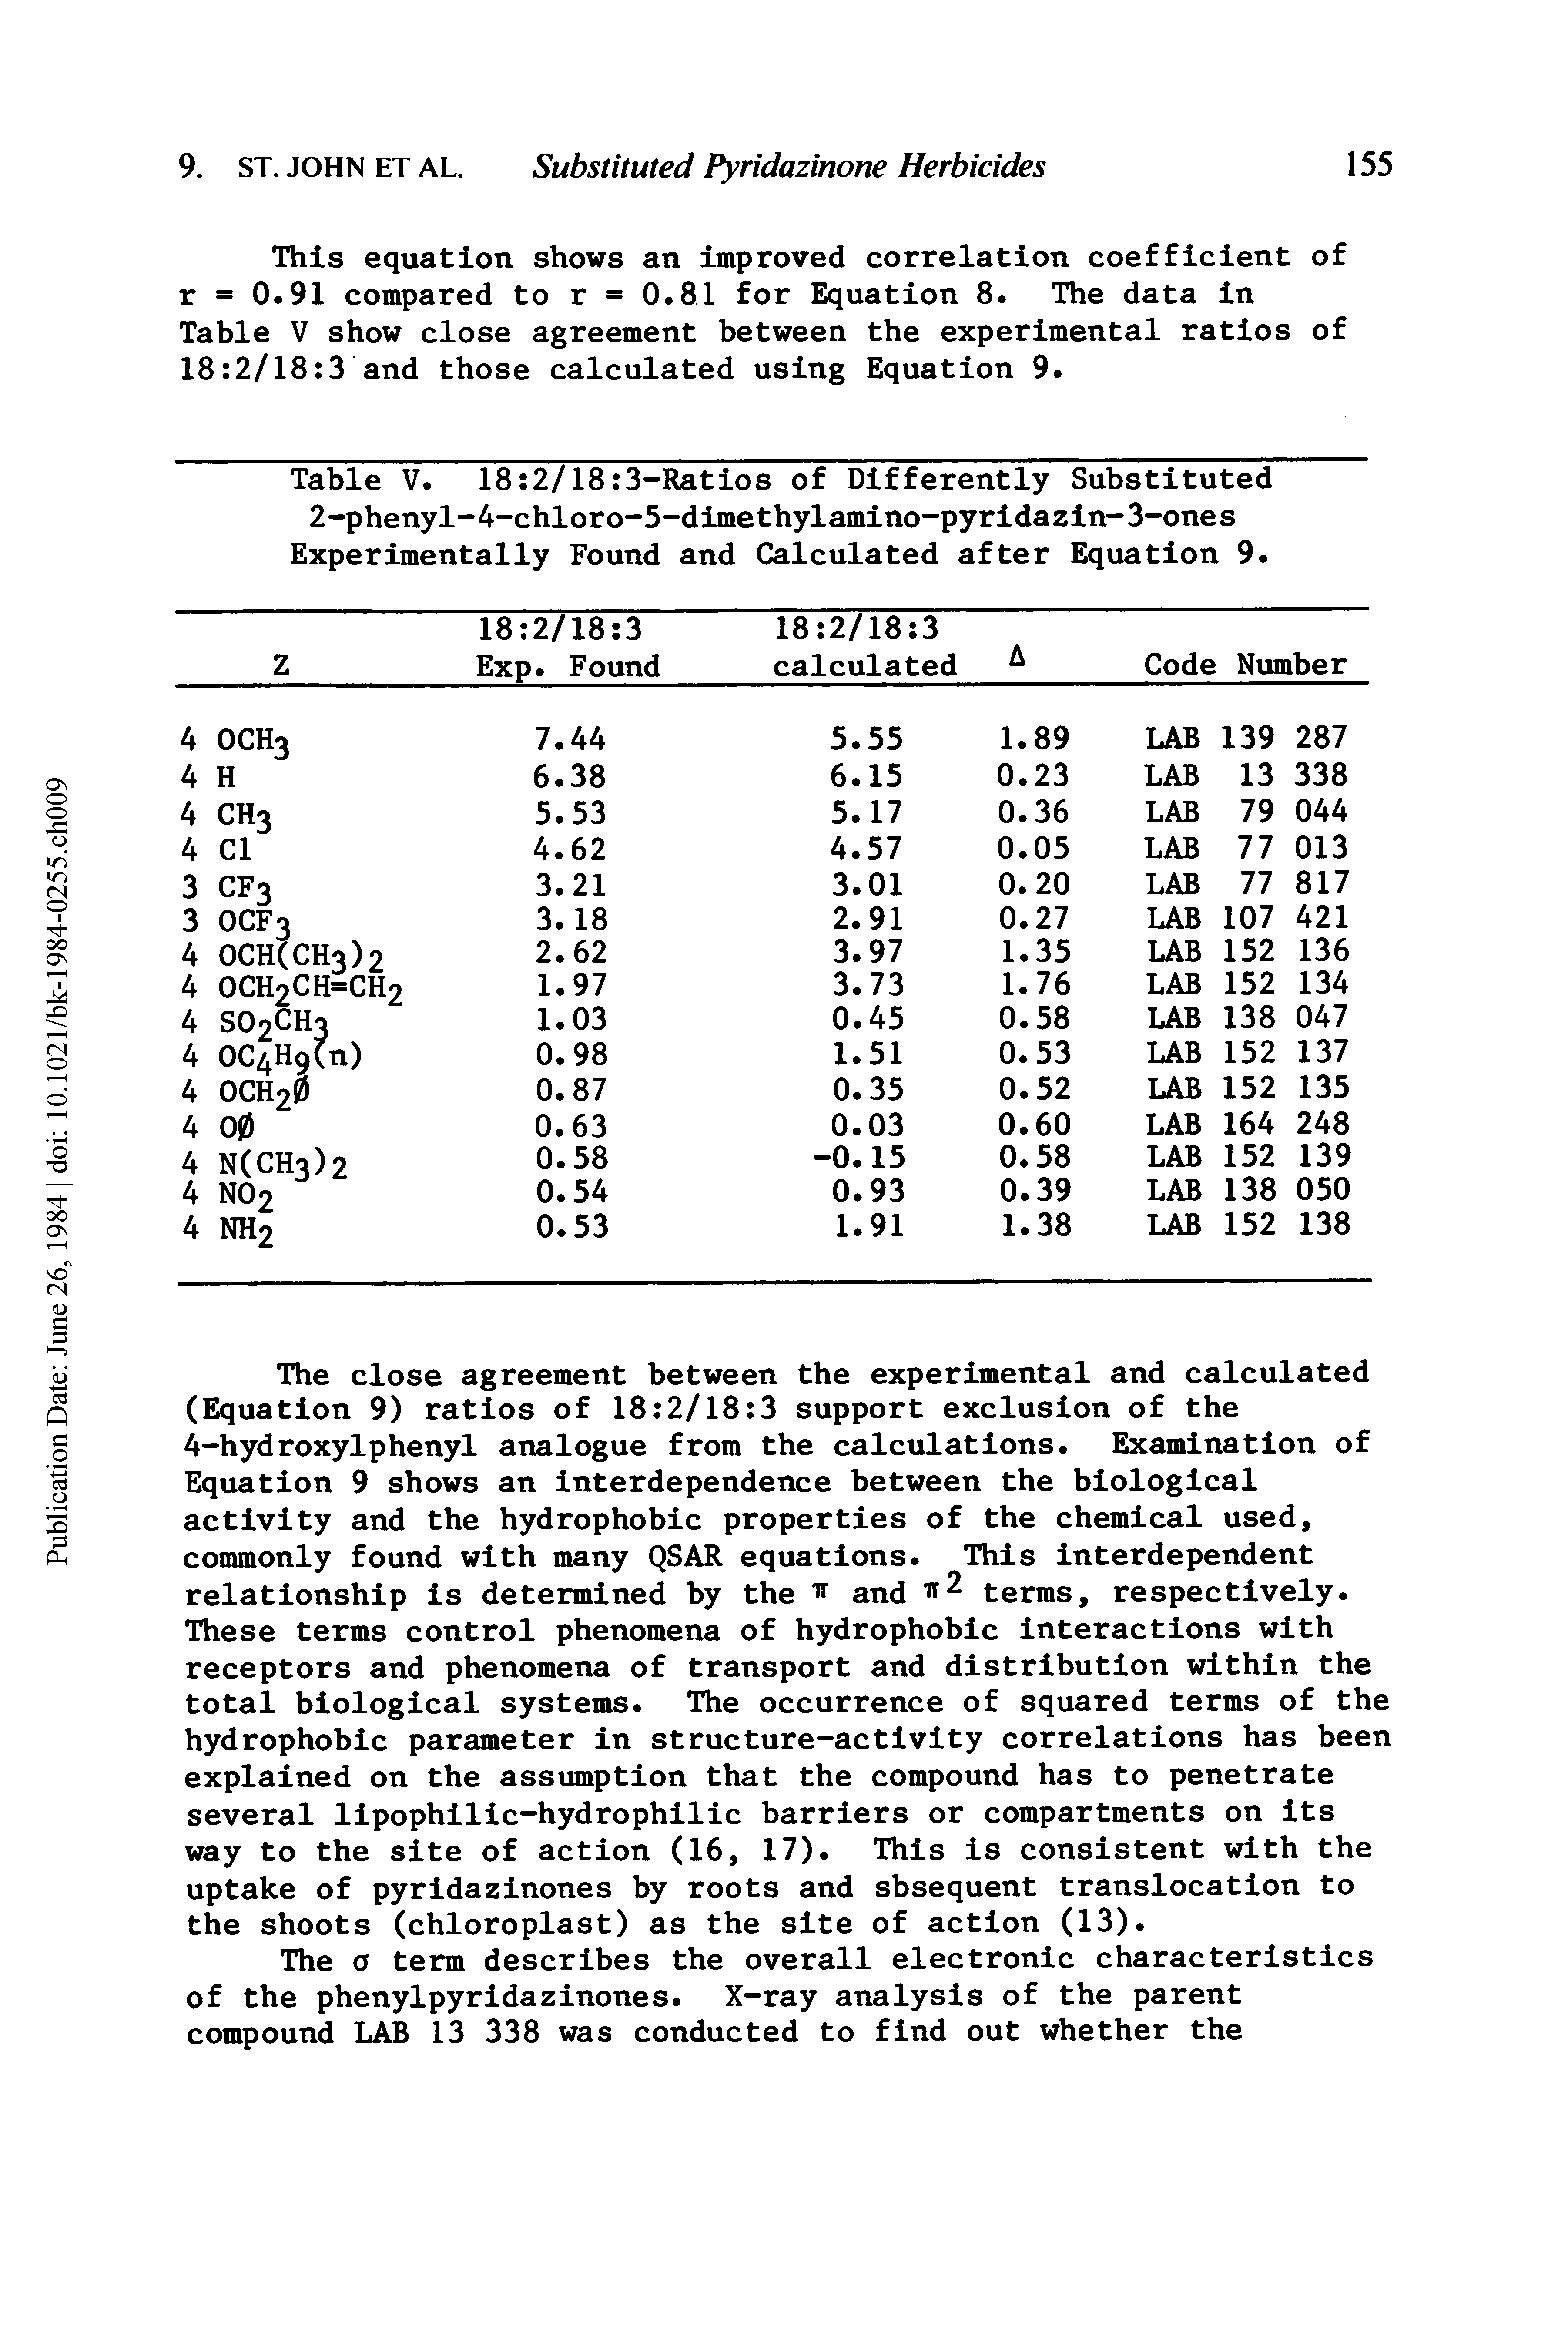 Table V. 18 2/18 3-Ratios of Differently Substituted 2-phenyl-4-chloro-5-dimethylamino-pyridazin-3-ones Experimentally Found and Calculated after Equation 9.